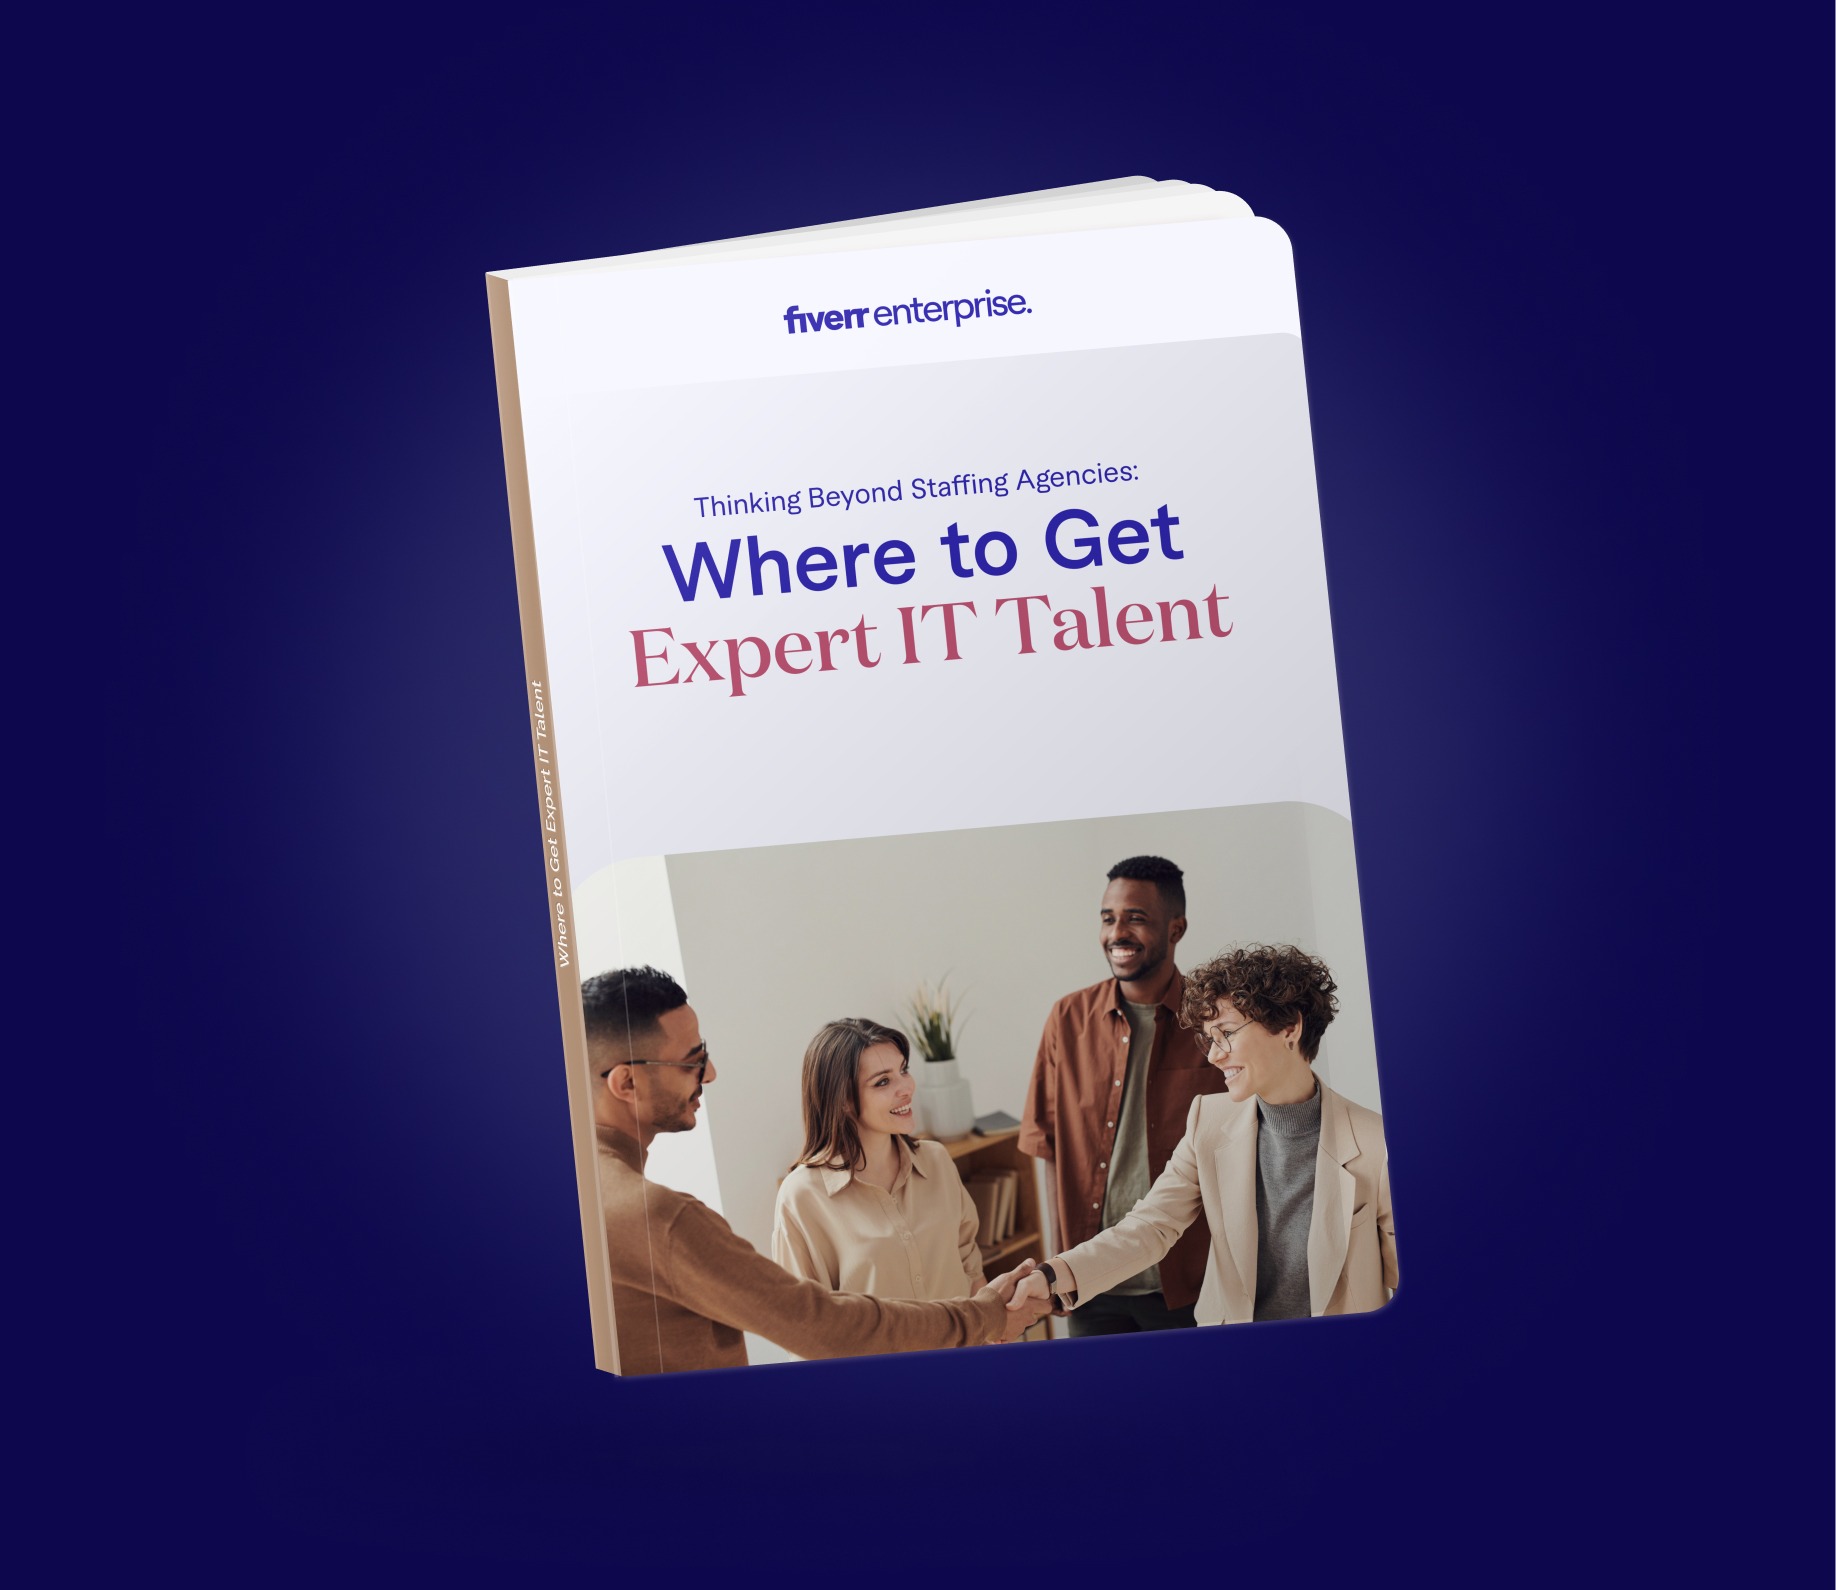 Where to Get Expert IT Talent